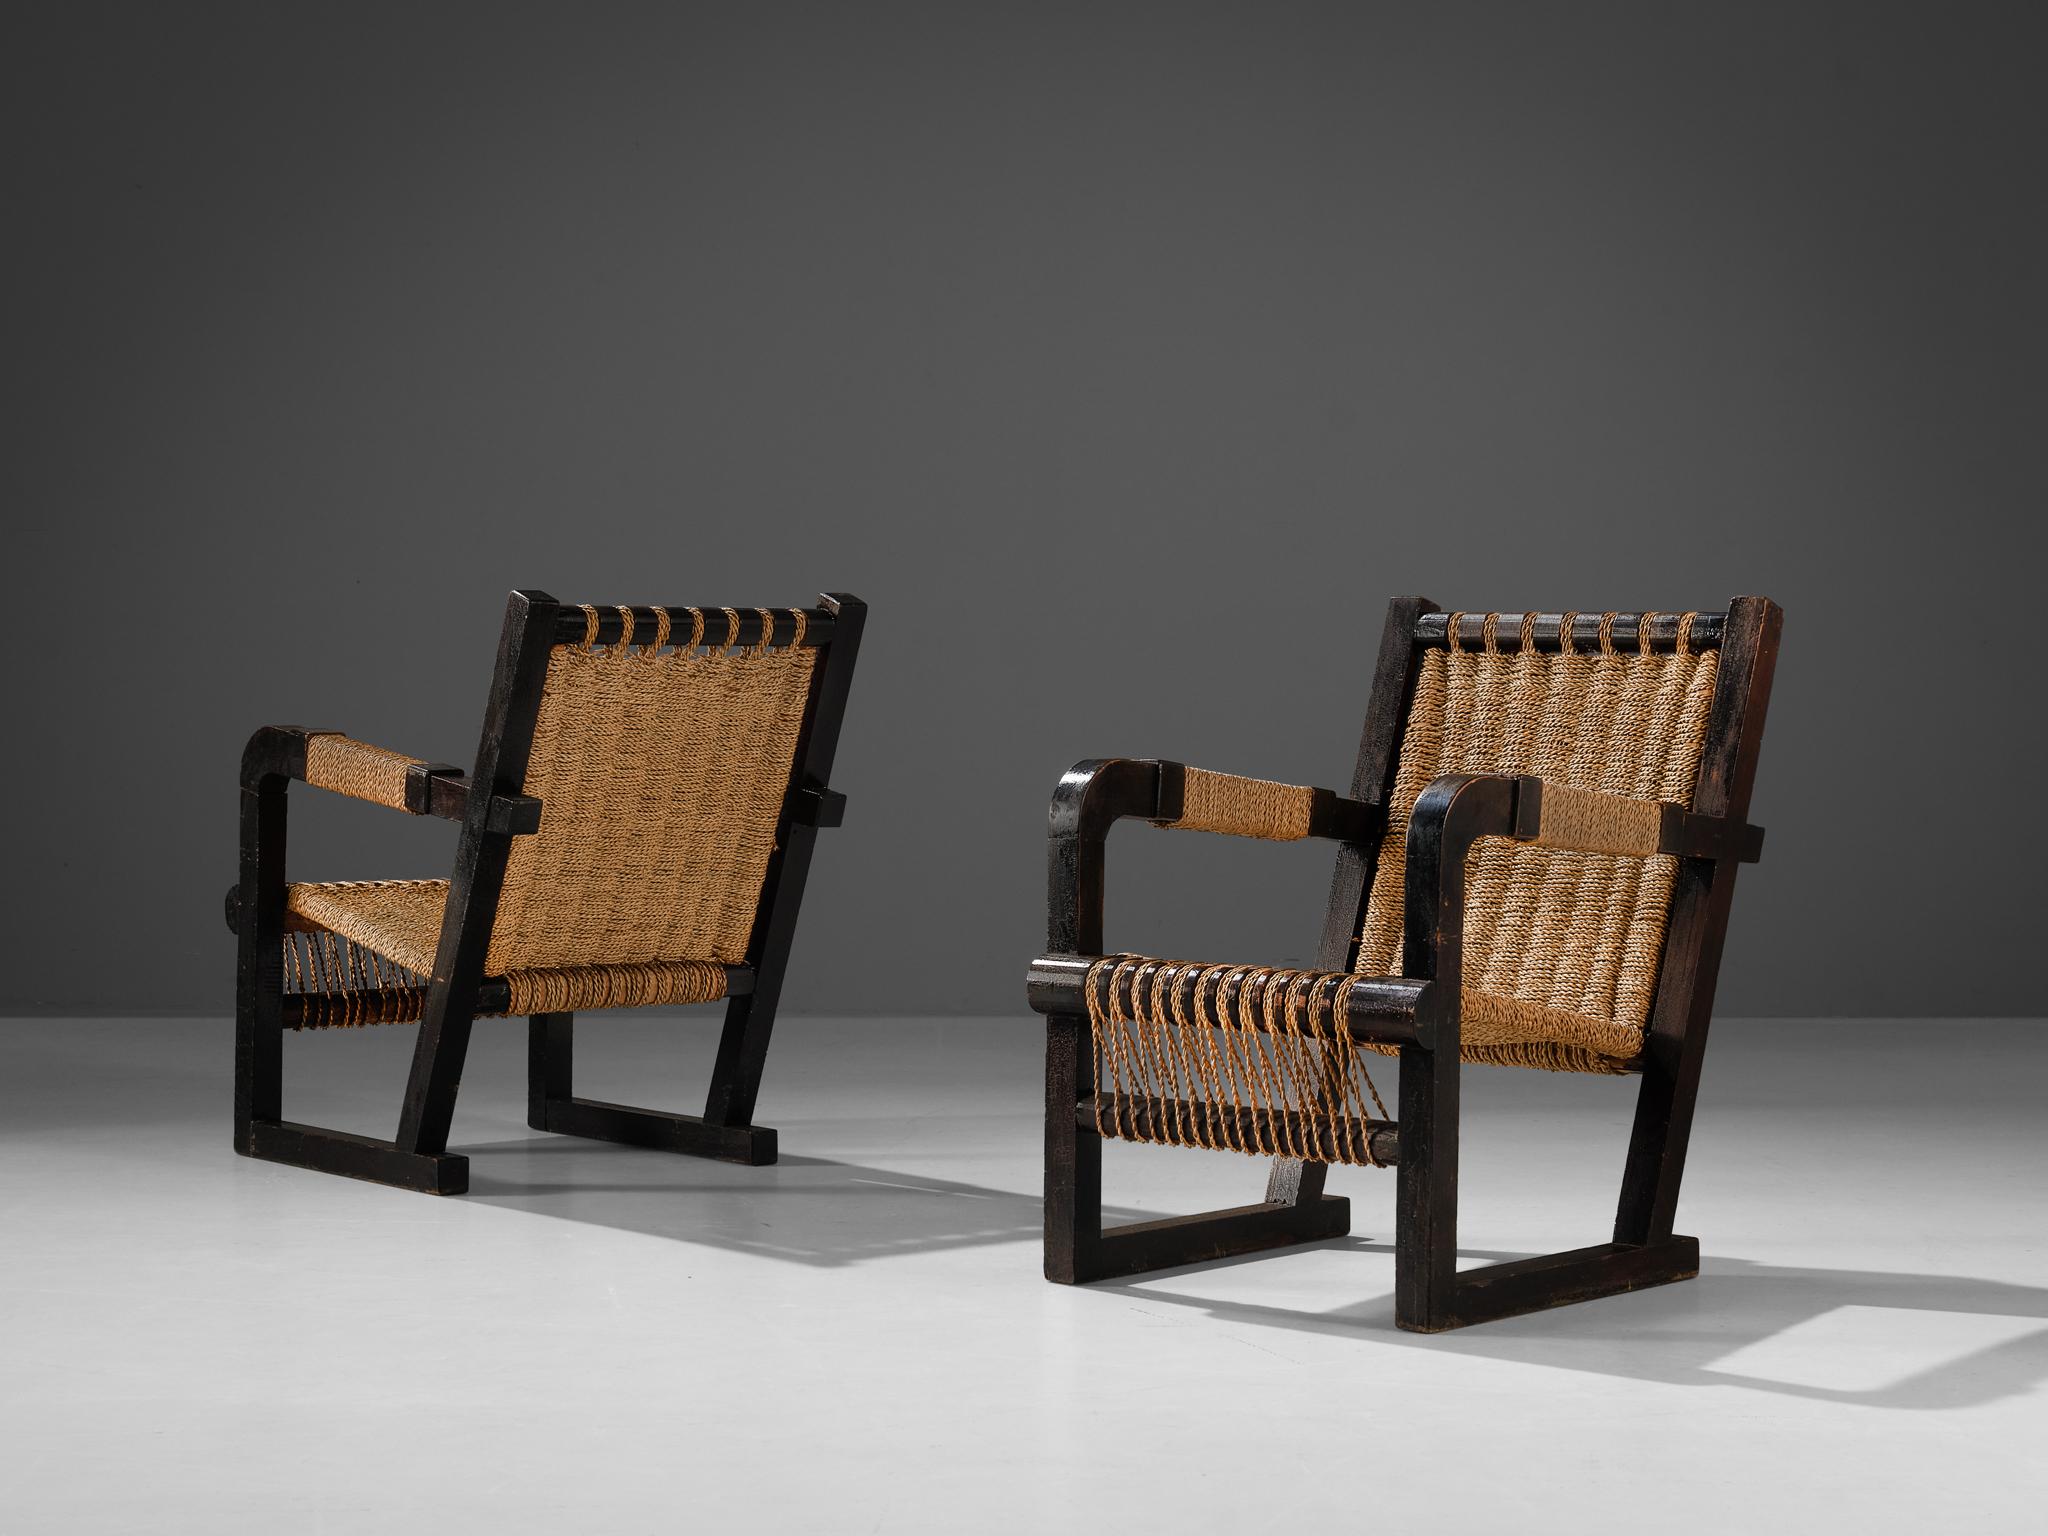 Francis Jourdain, pair of lounge chairs, dark stained pine, rope, France, 1930s

This stunning pair of lounge chairs was designed by Francis Jourdain in France around 1930. The chair show a raked back and the seat is created out of intertwined